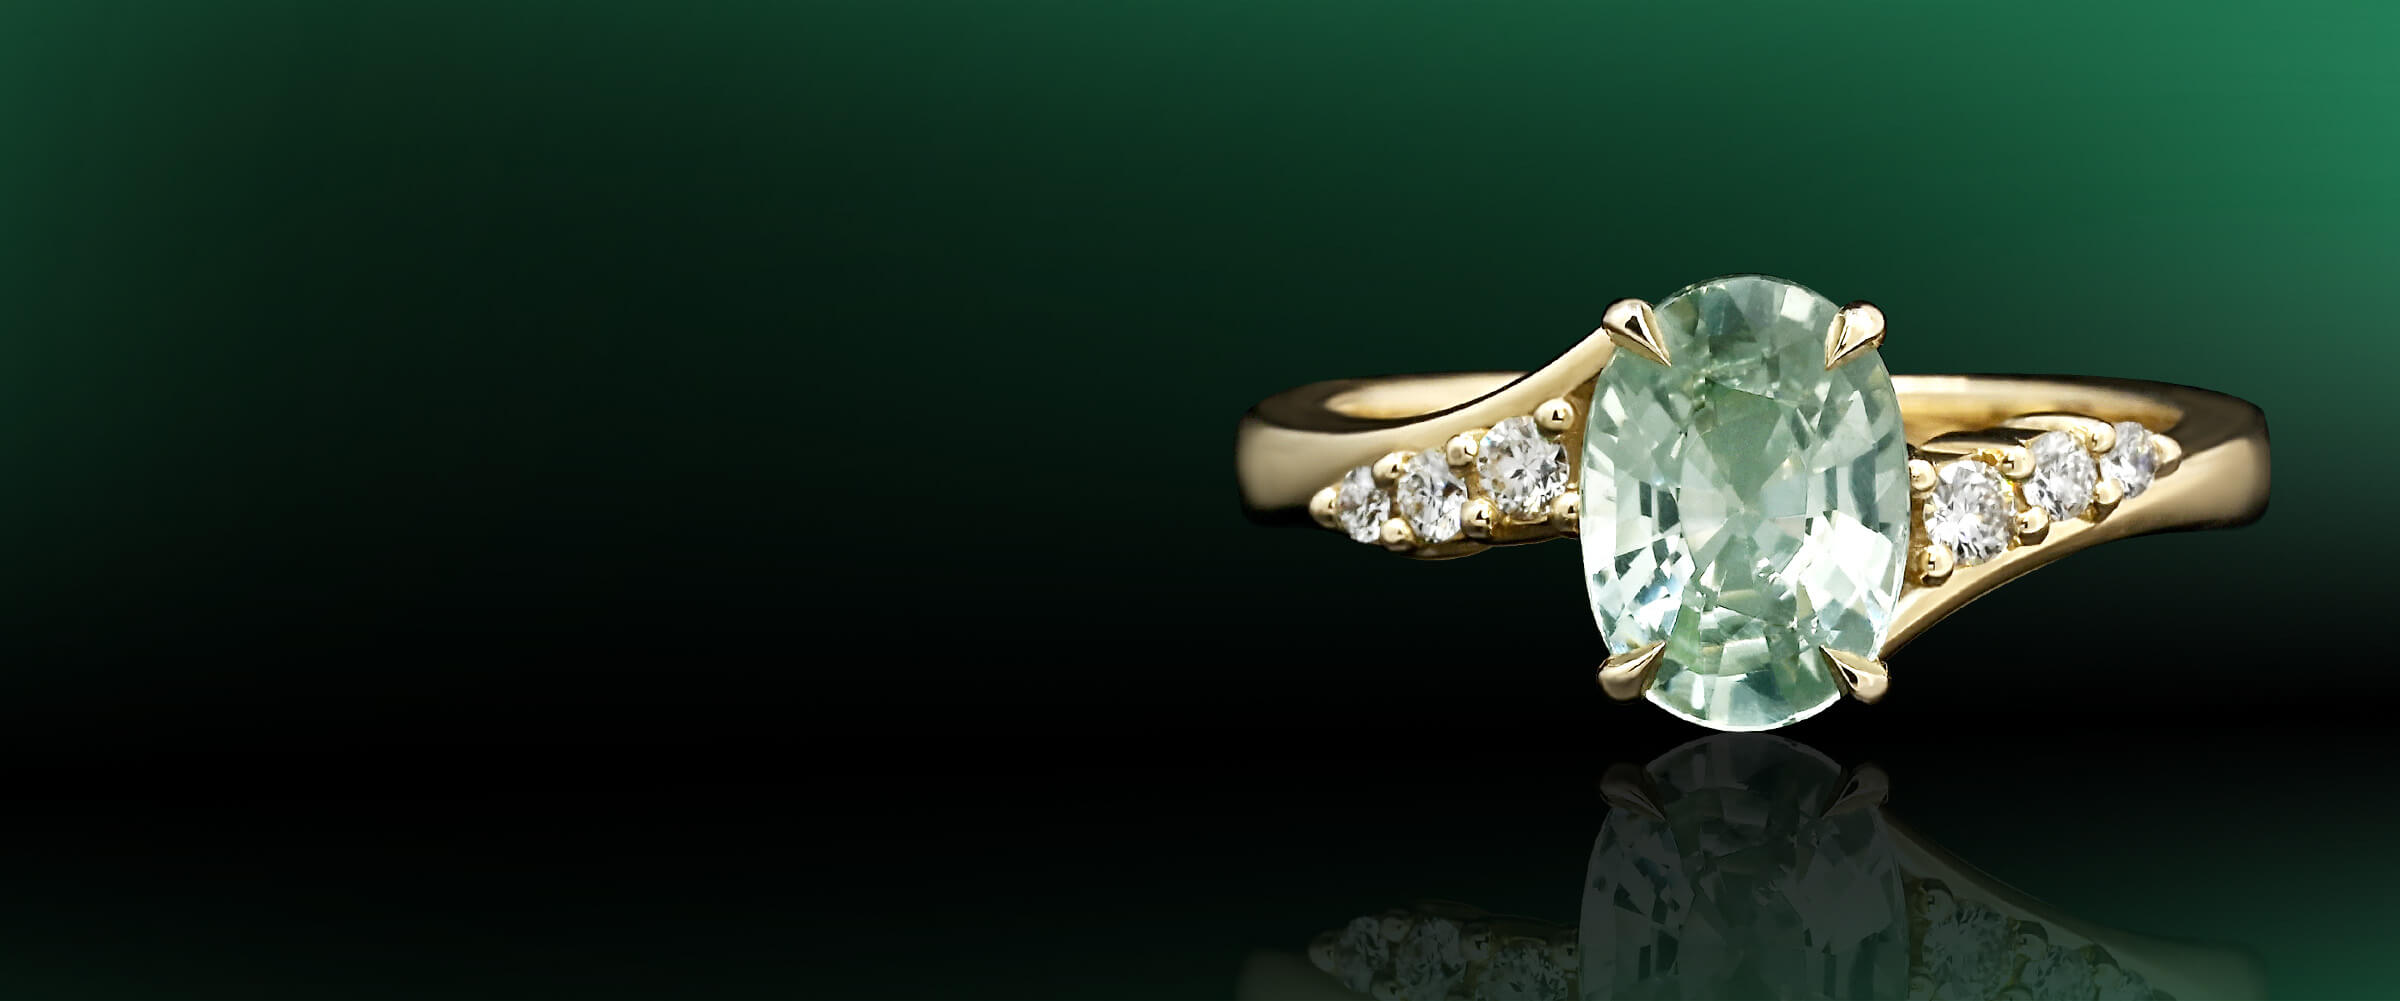 Nature's beauty, captured in a gem 💍💚 Explore the world of exquisite Green  Sapphire and Diamond creations. #LuxuryJewels #greensapphire… | Instagram